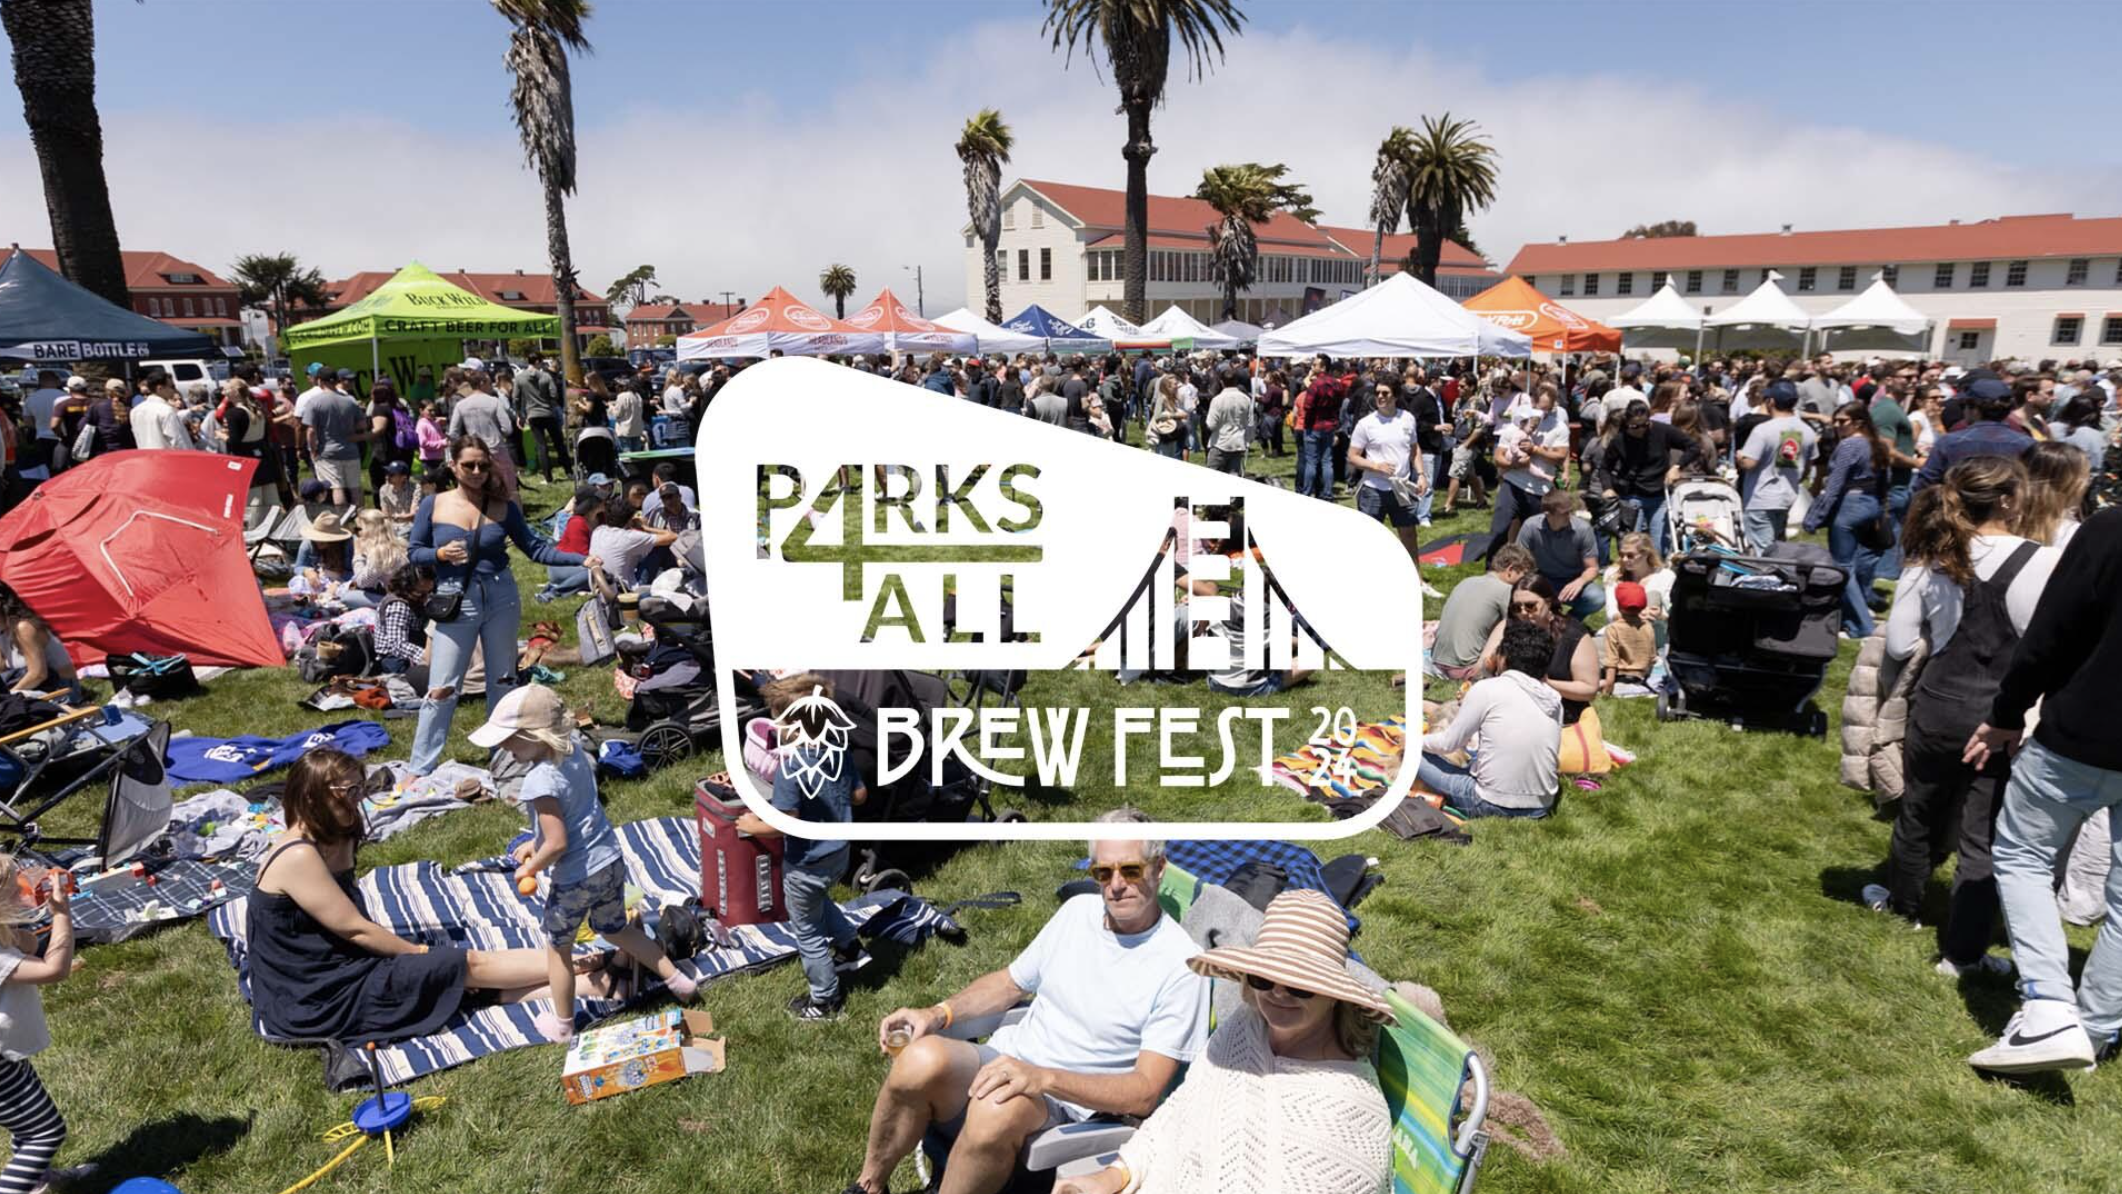 Visitors gather at the Parks4All Brewfest 29, engaging in various outdoor activities. Some attendees relax on blankets and chairs, chatting near the vendor tents. Palm trees and historic buildings form a backdrop under clear skies, enhancing the lively ambiance.